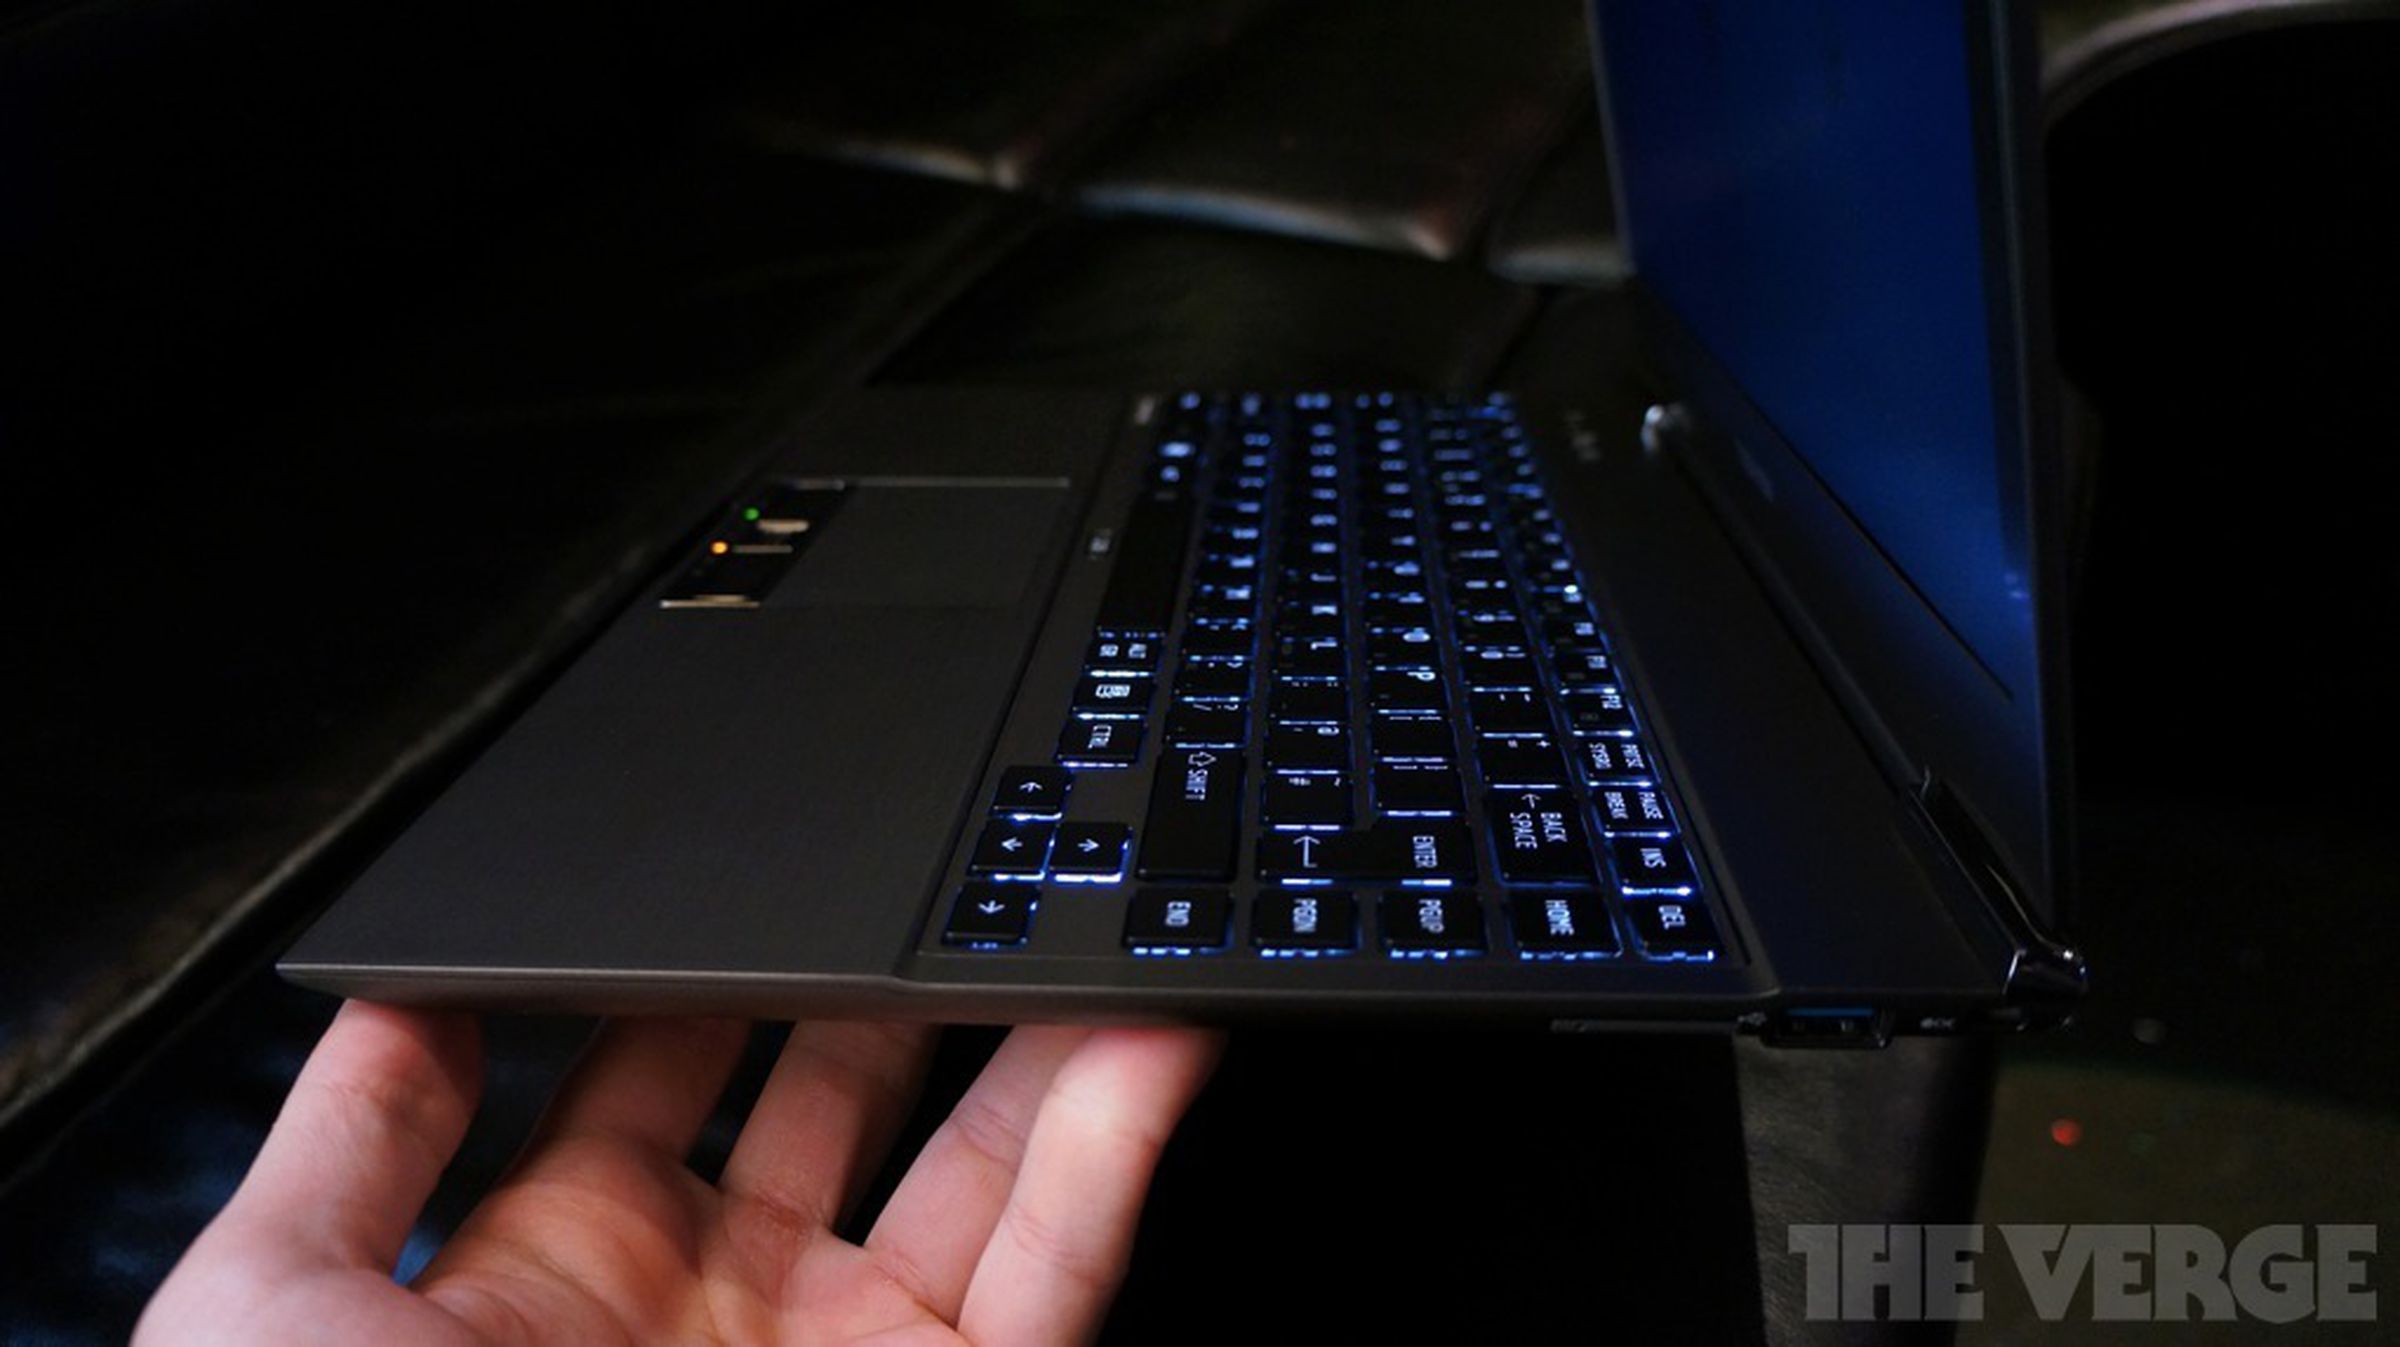 Toshiba Portege Z930 hands-on pictures